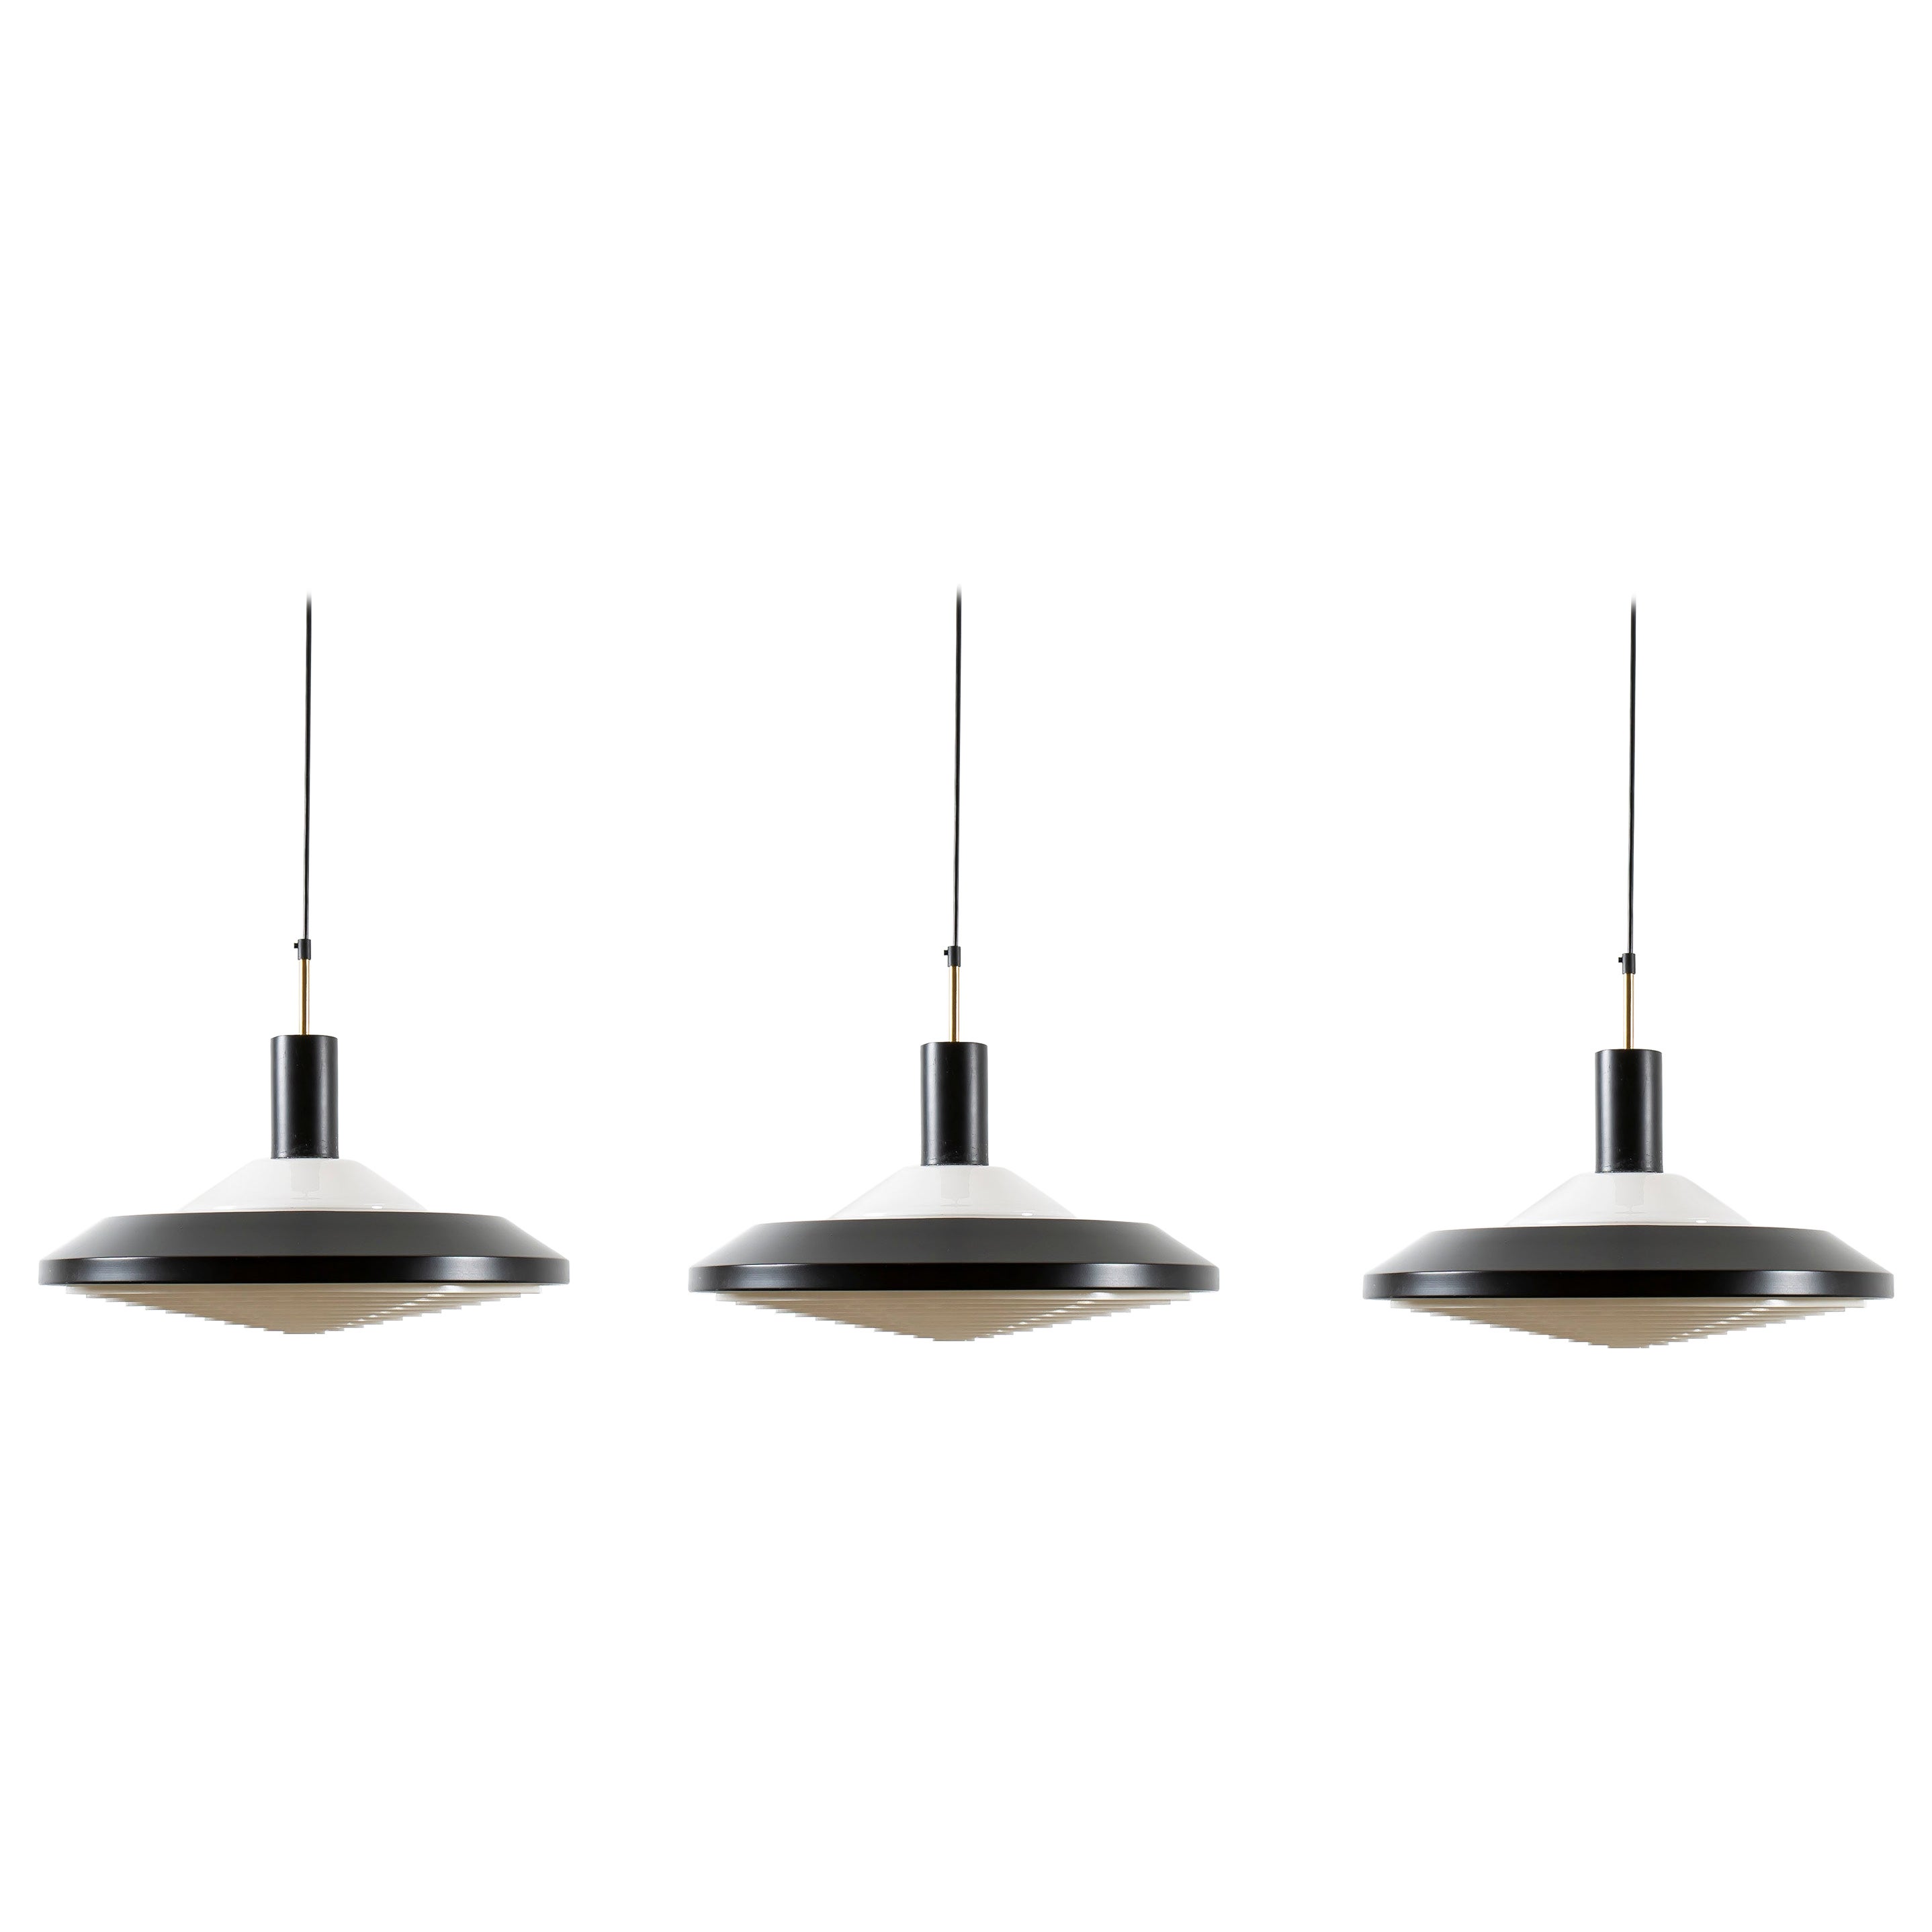 Set of Three Midcentury Ceiling Lights by AWF, Norway, 1960s